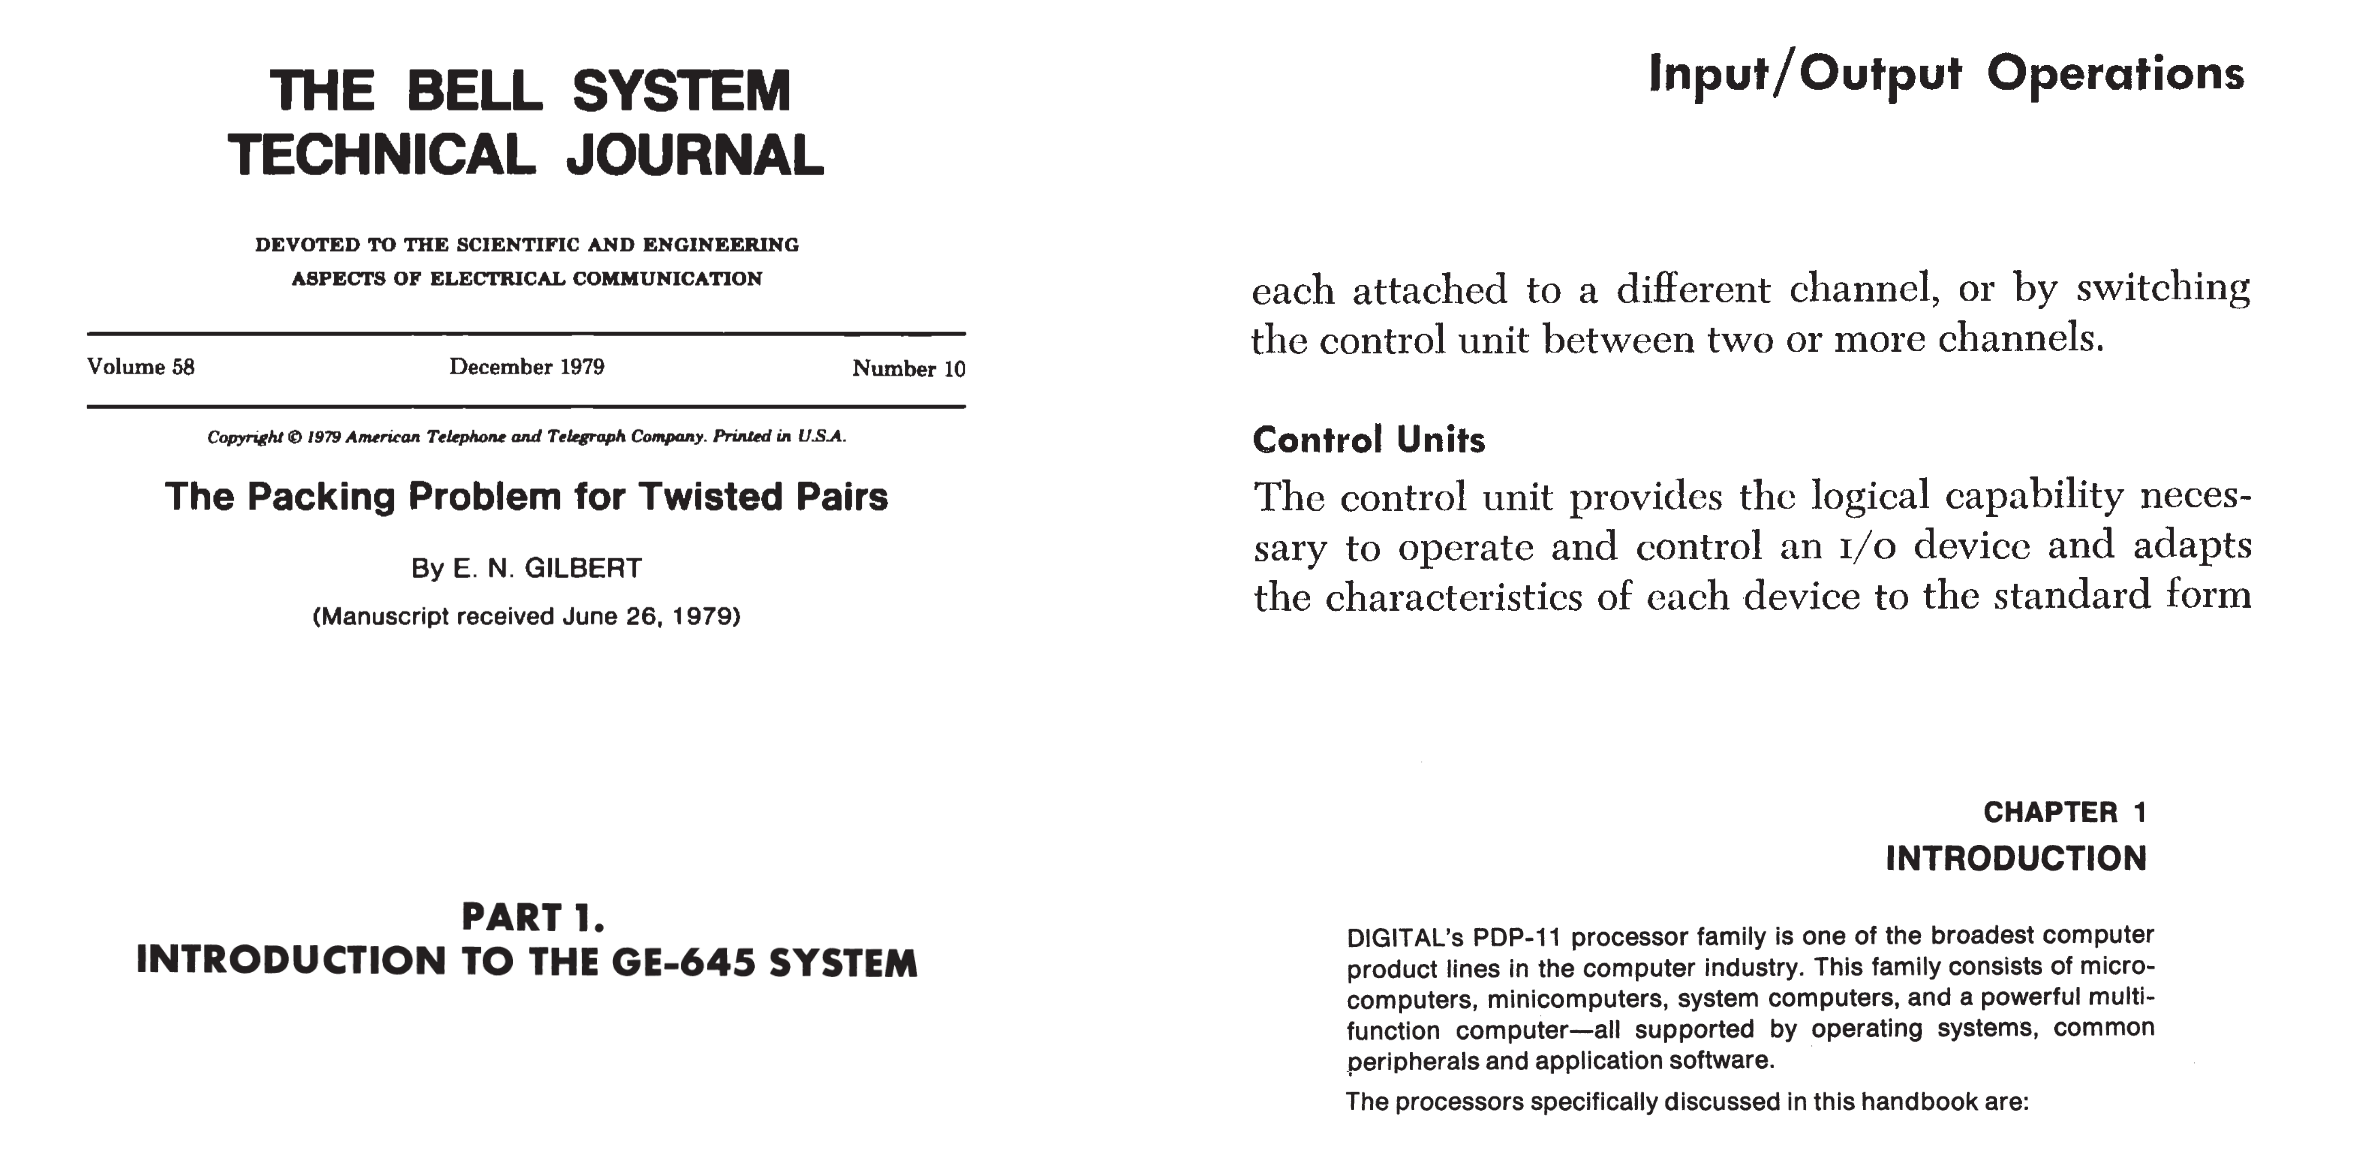 IBM System/360 manual and the Bell System Technical Journal